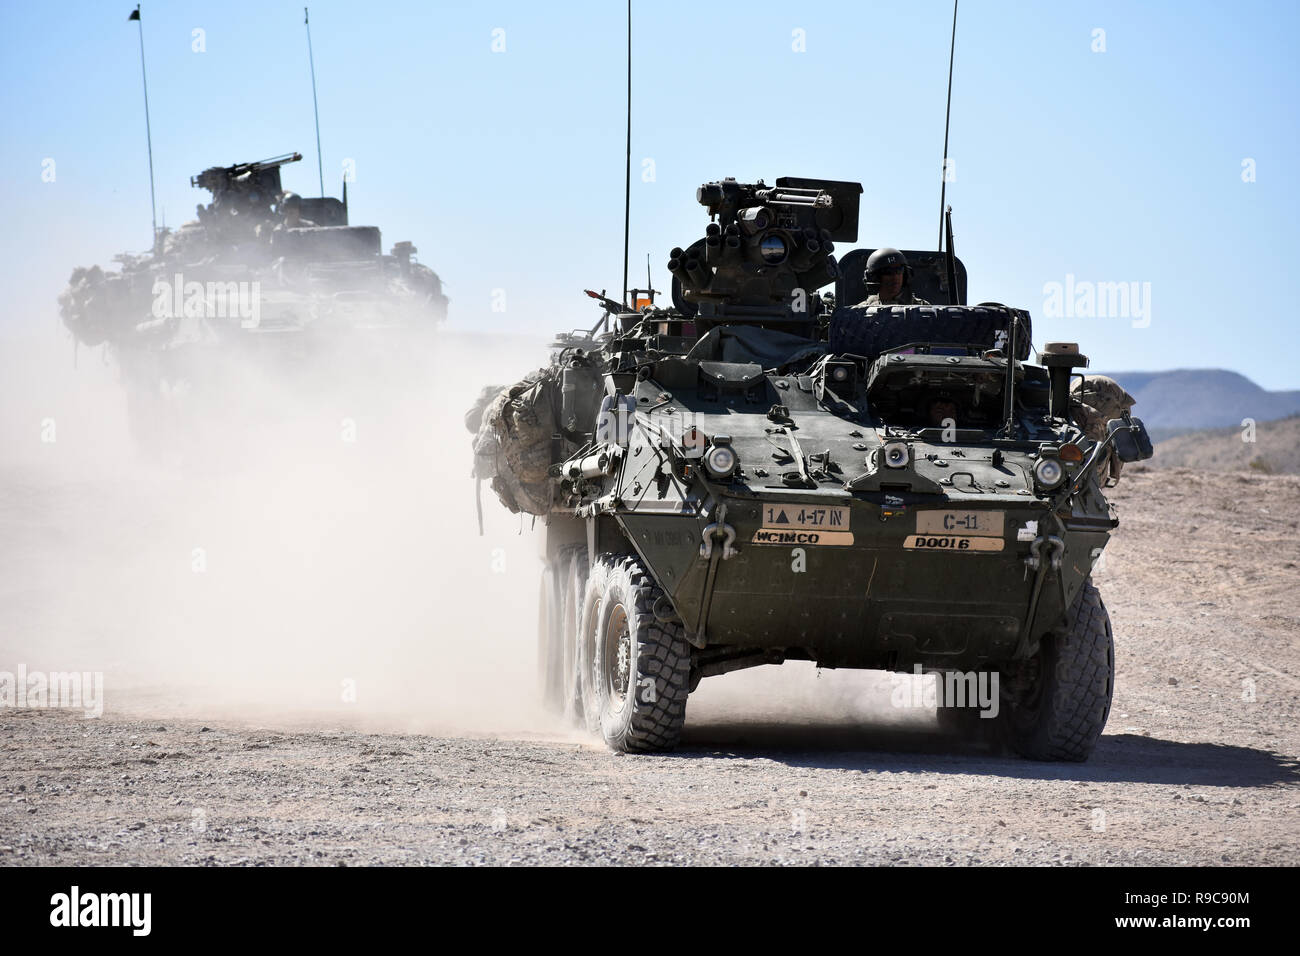 Stryker combat vehicles assigned to Company C, 4th Battalion, 17th Infantry Regiment, 1st Stryker Brigade Combat Team, 1st Armored Division, enter the Malakhand Training Village, Orogrande Range Complex, N.M., June 24, 2018. Stock Photo